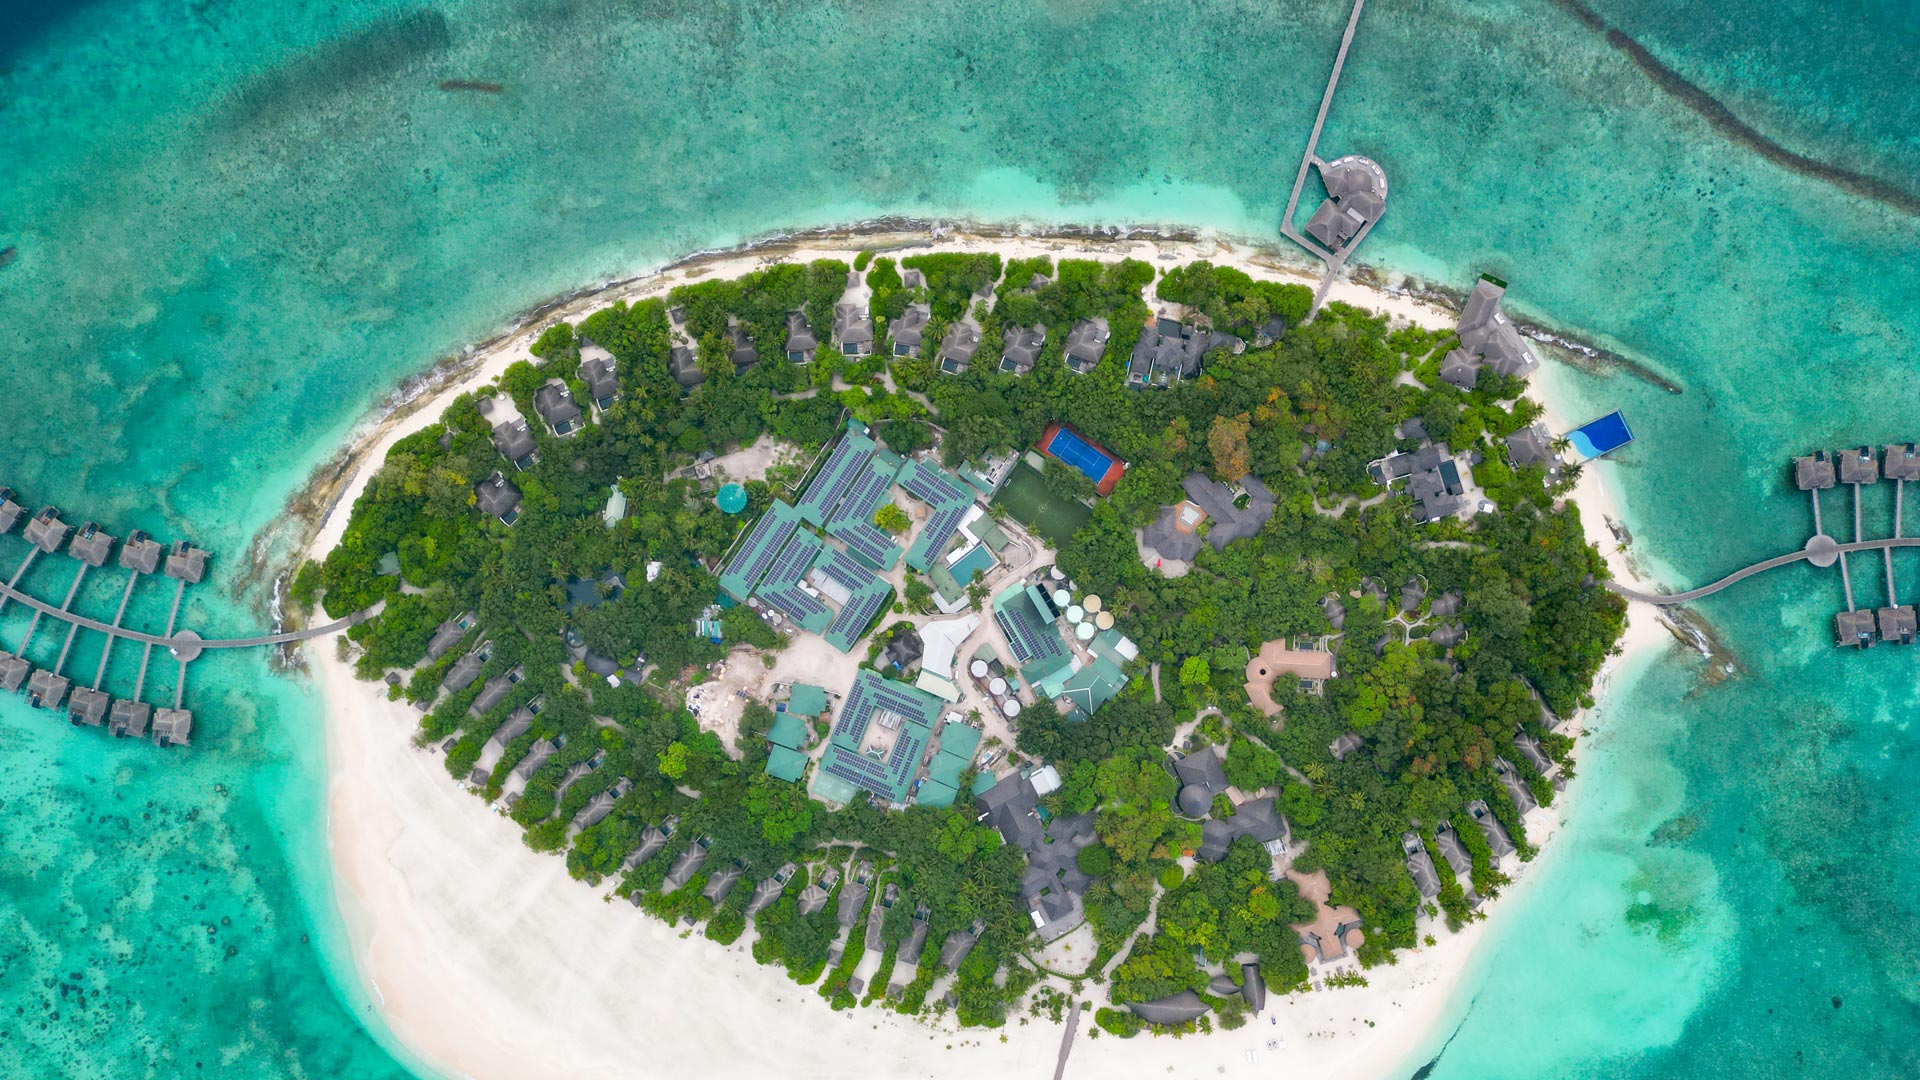 Aerial overview of rooftop solar pv system by Swimsol at at Ja Manafaru island Maldives